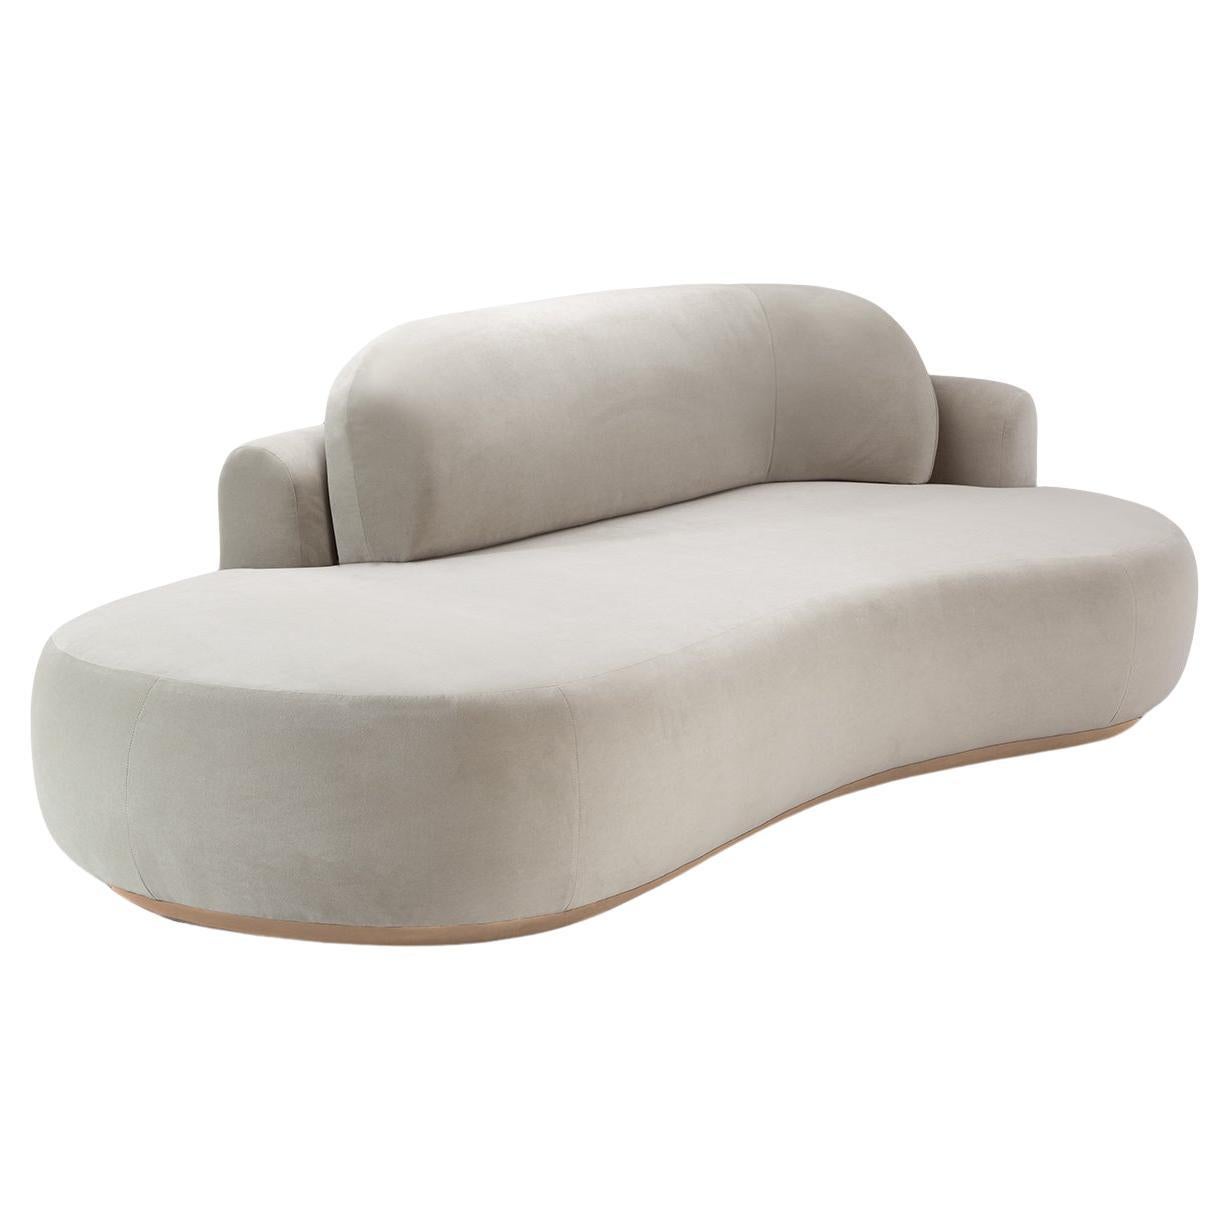 Handmade Contemporary Mambo Unlimited Ideas Naked Sofa Single Soft Upholstery For Sale